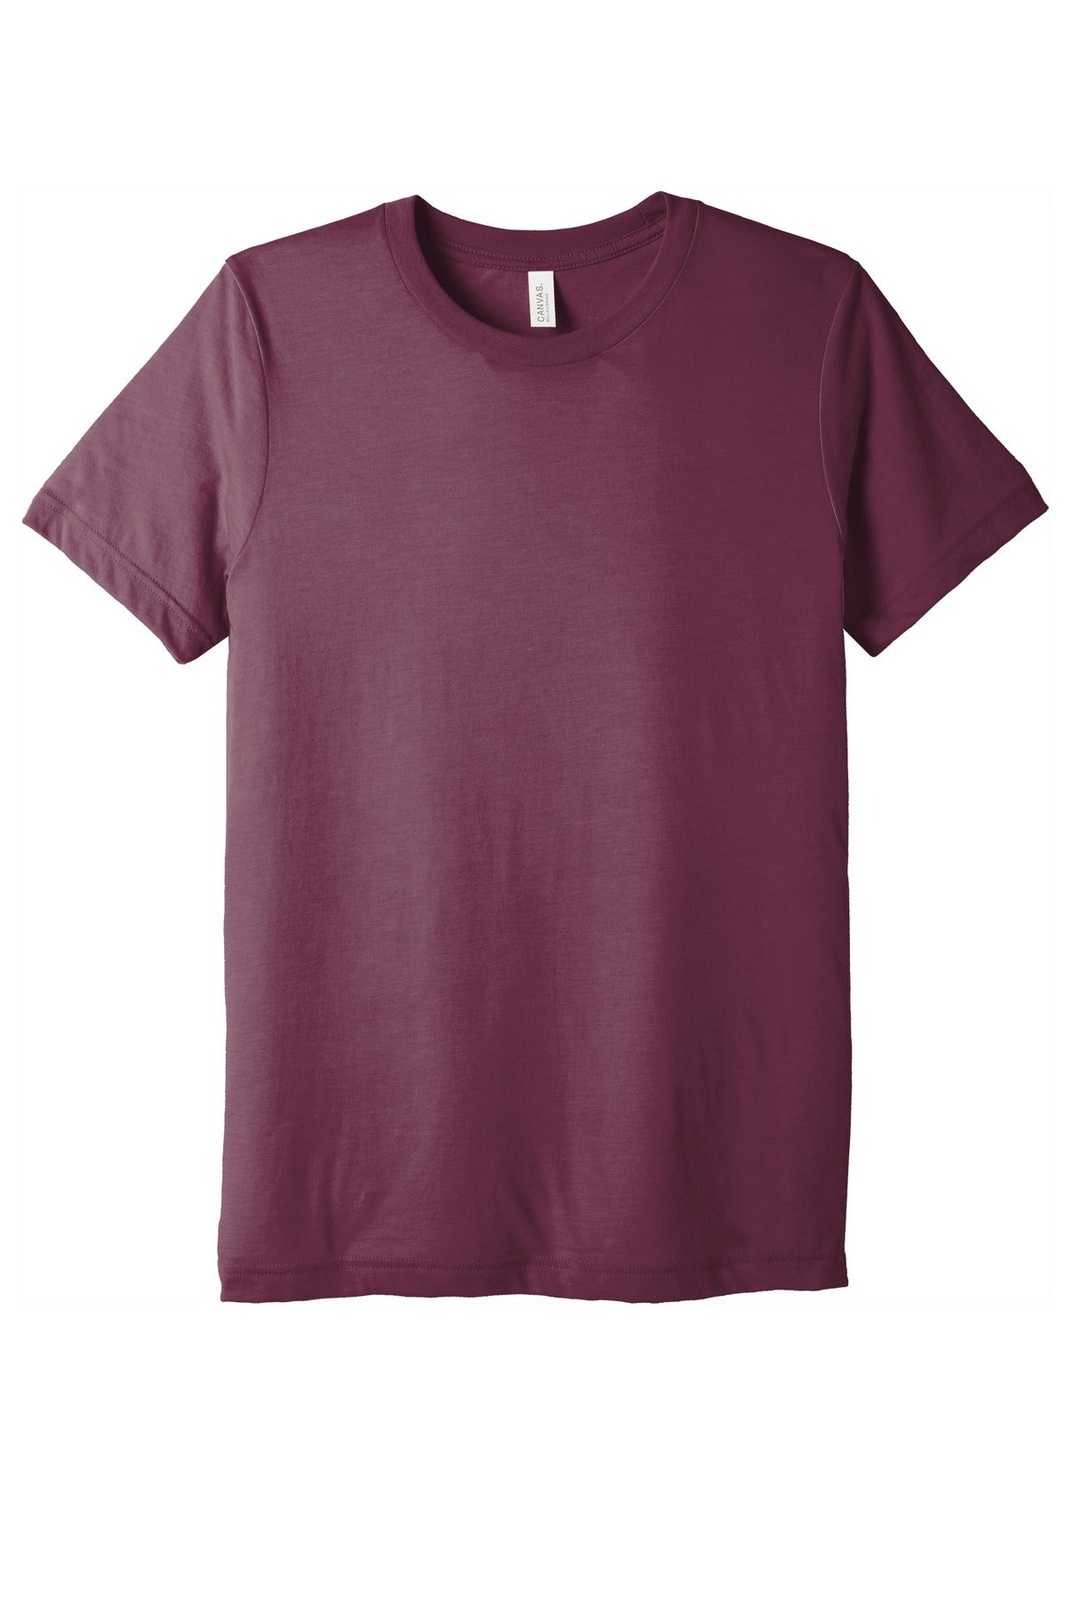 Bella + Canvas 3413 Unisex Triblend Short Sleeve Tee - Maroon Triblend - HIT a Double